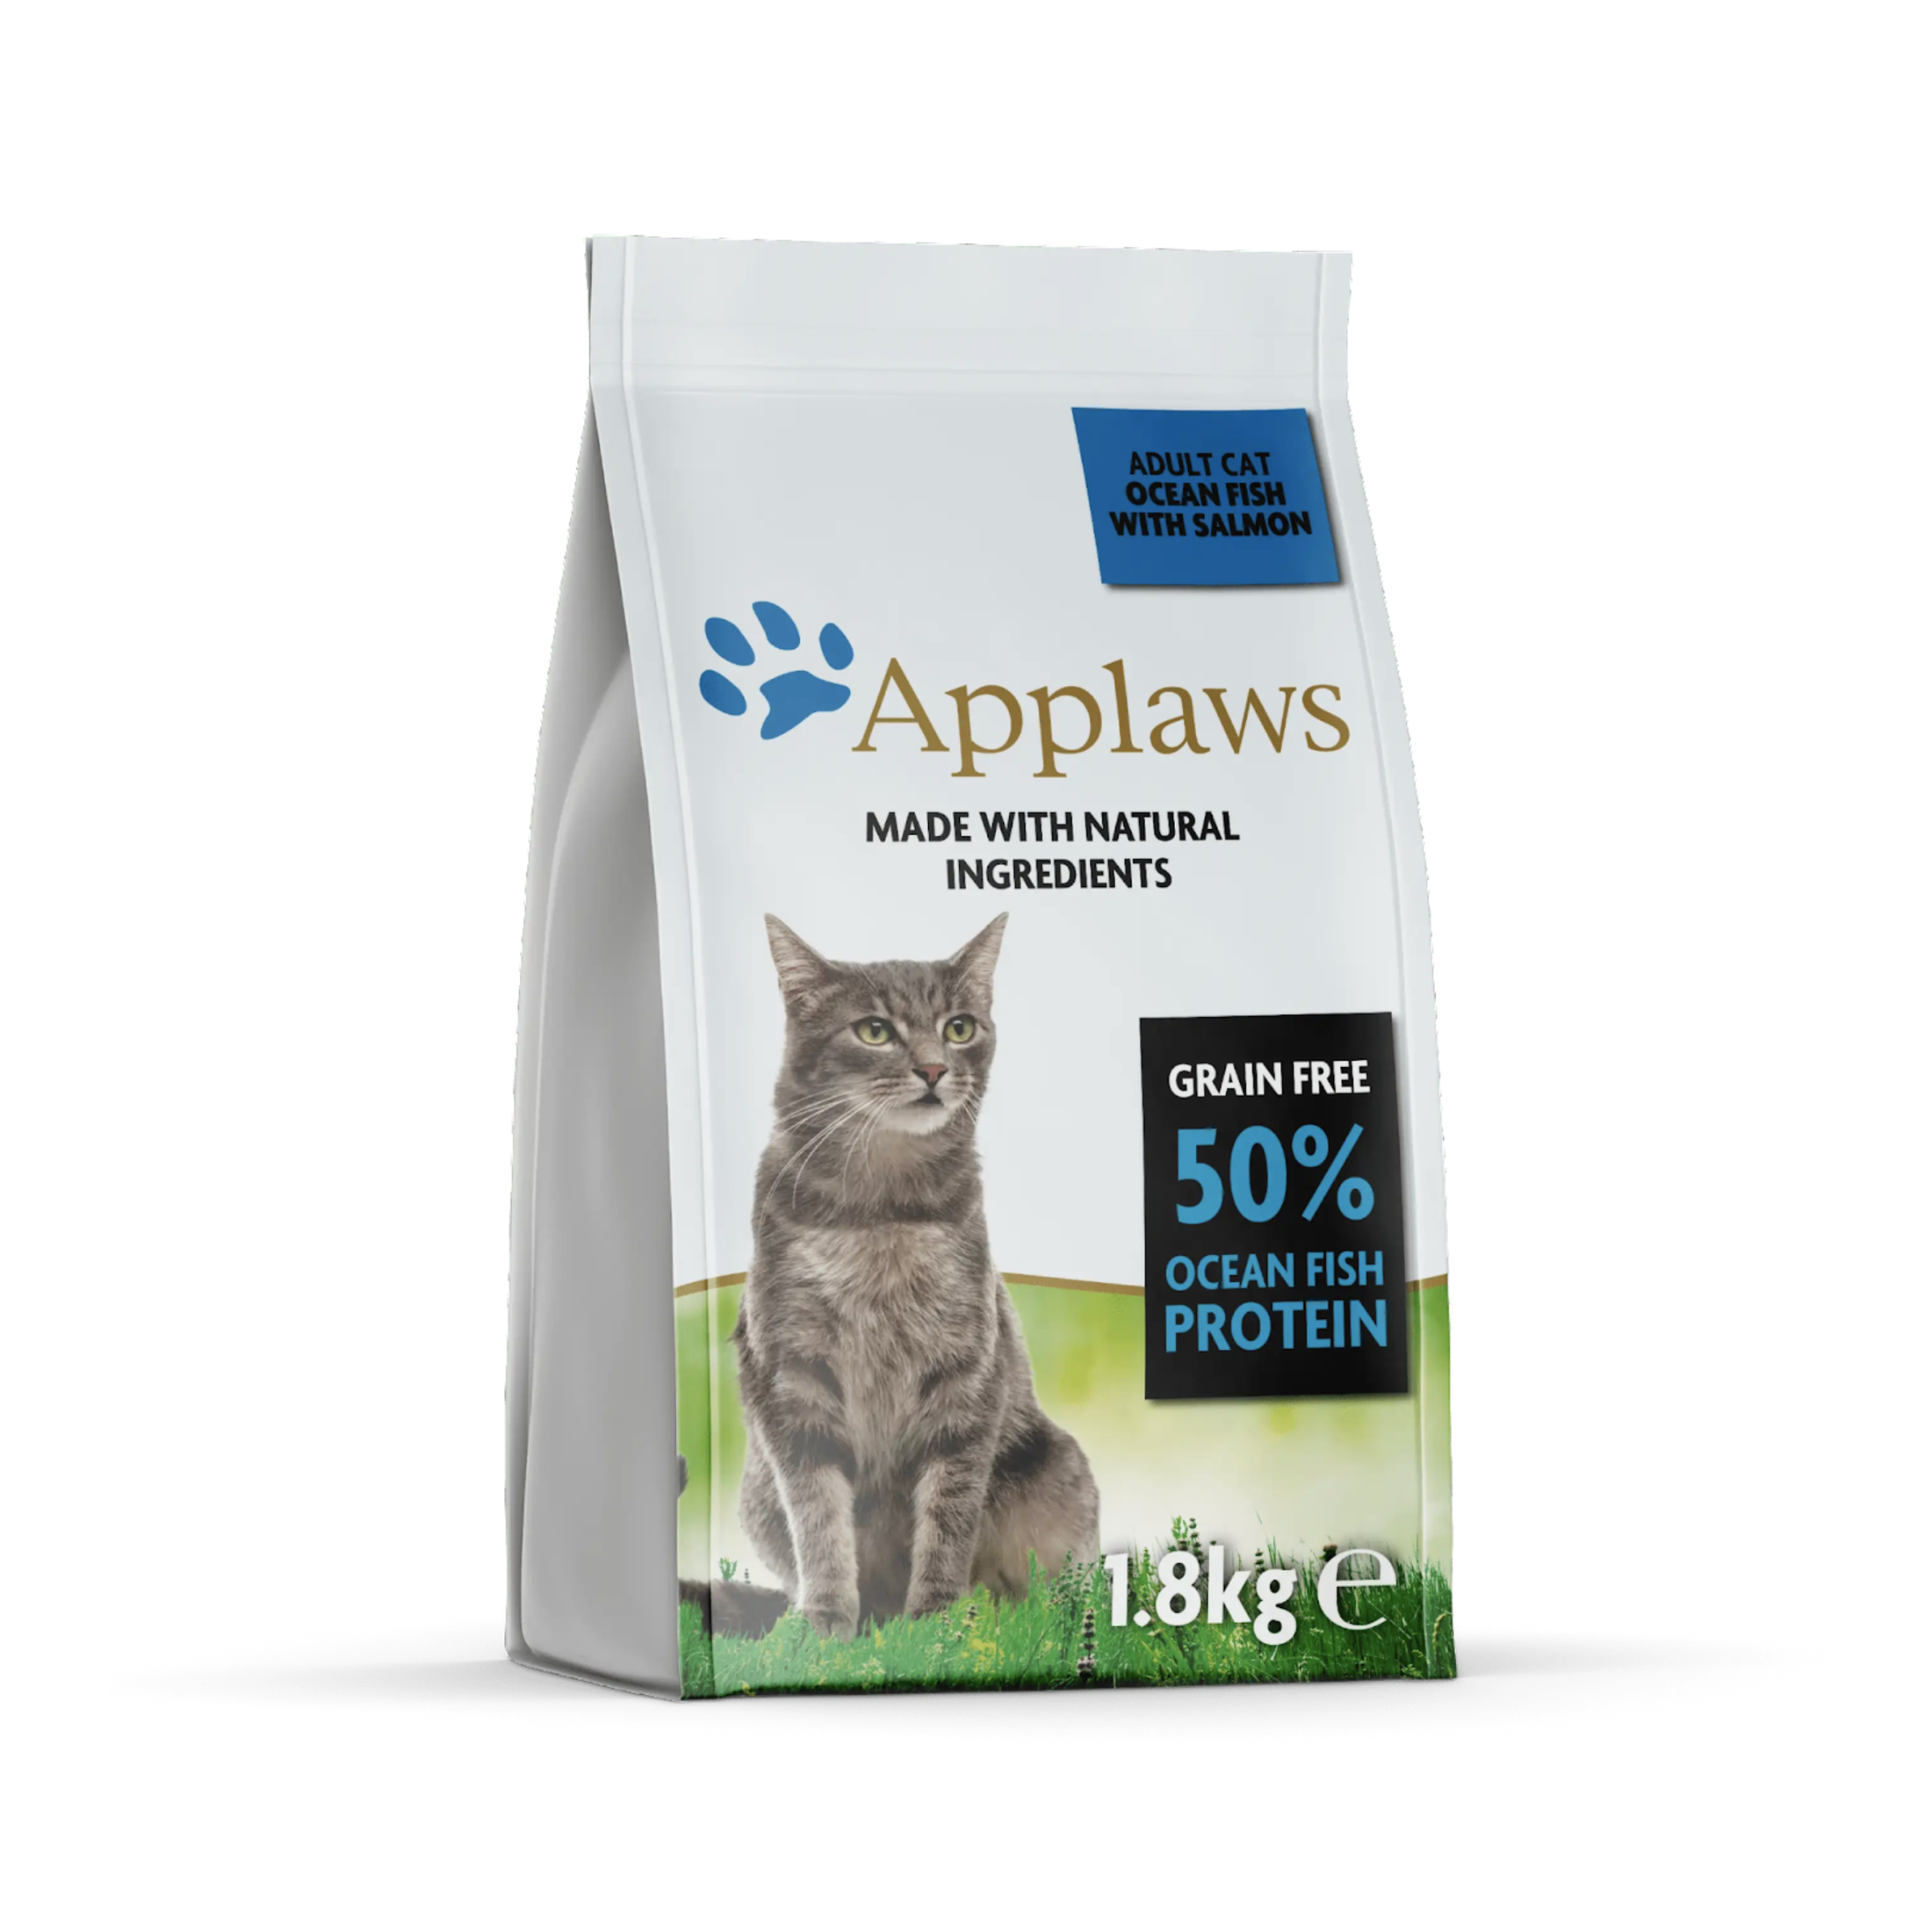 Applaws Adult Dry Cat Food - Ocean Fish with Salmon, Grain Free, Single Protein, Naturally Hypo-Allergenic, Pre-Biotic and Pro-Biotic, 1.8 kg